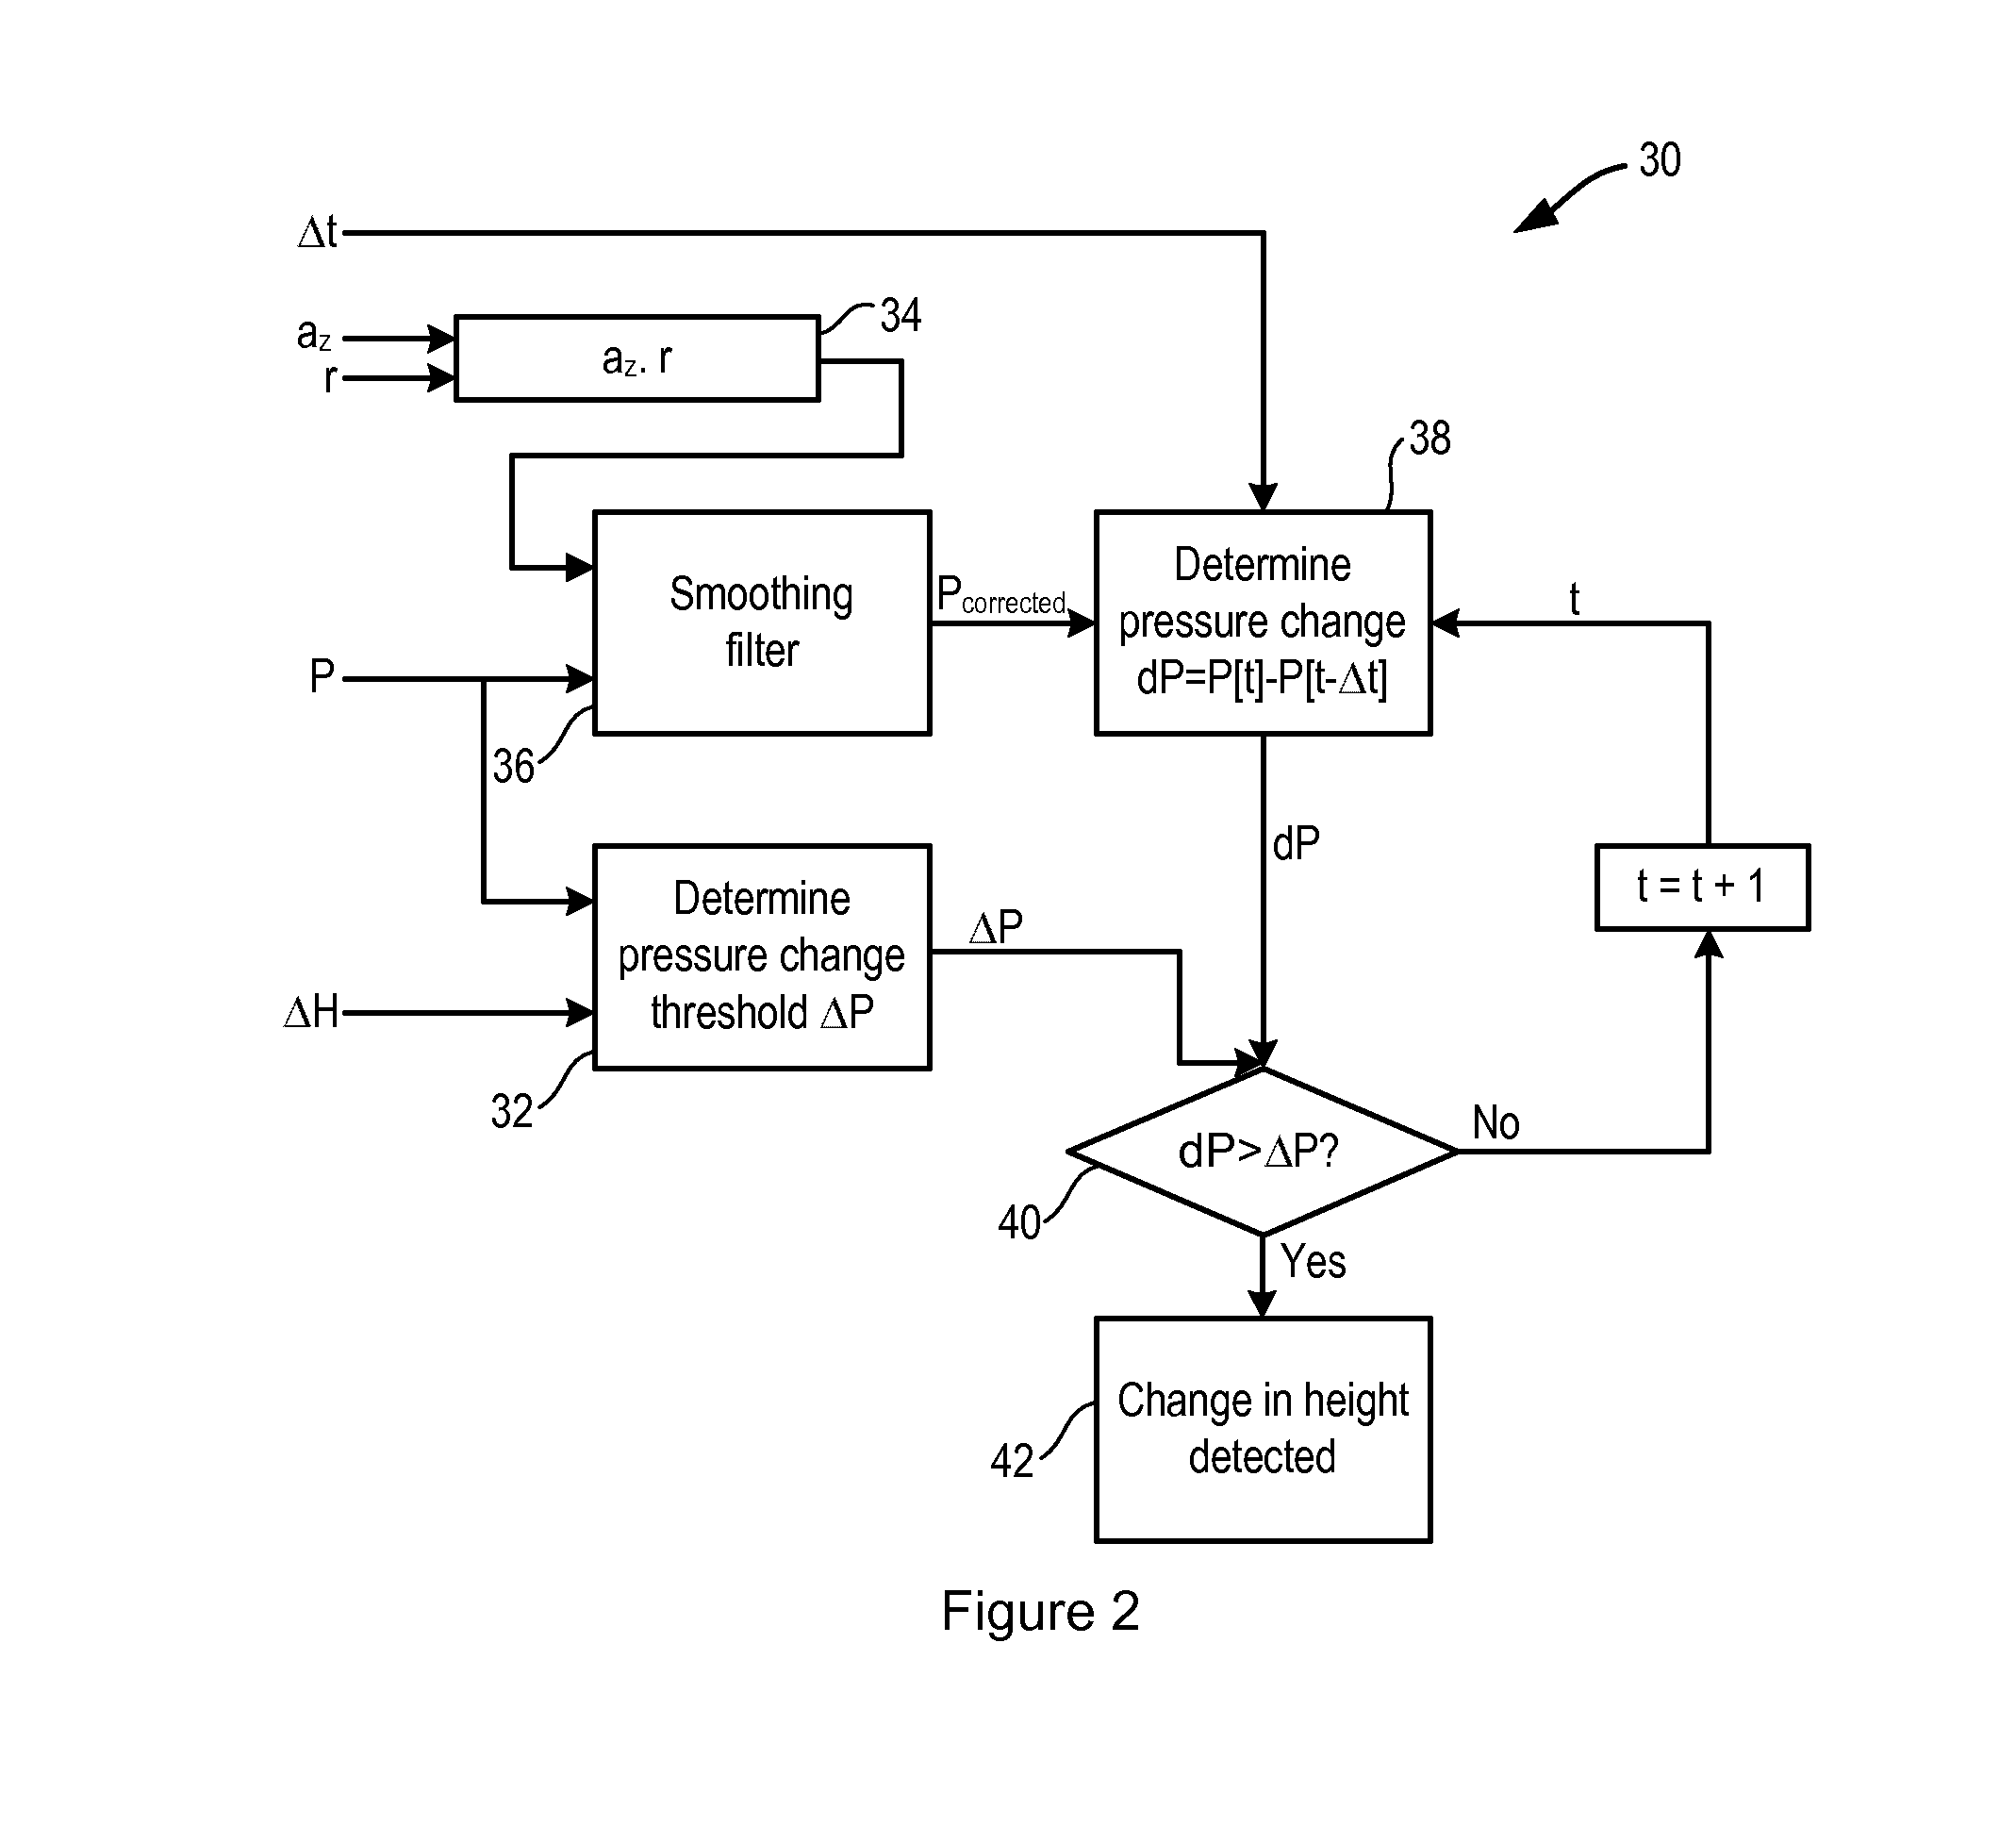 Monitoring the change in height of a device using an air pressure sensor